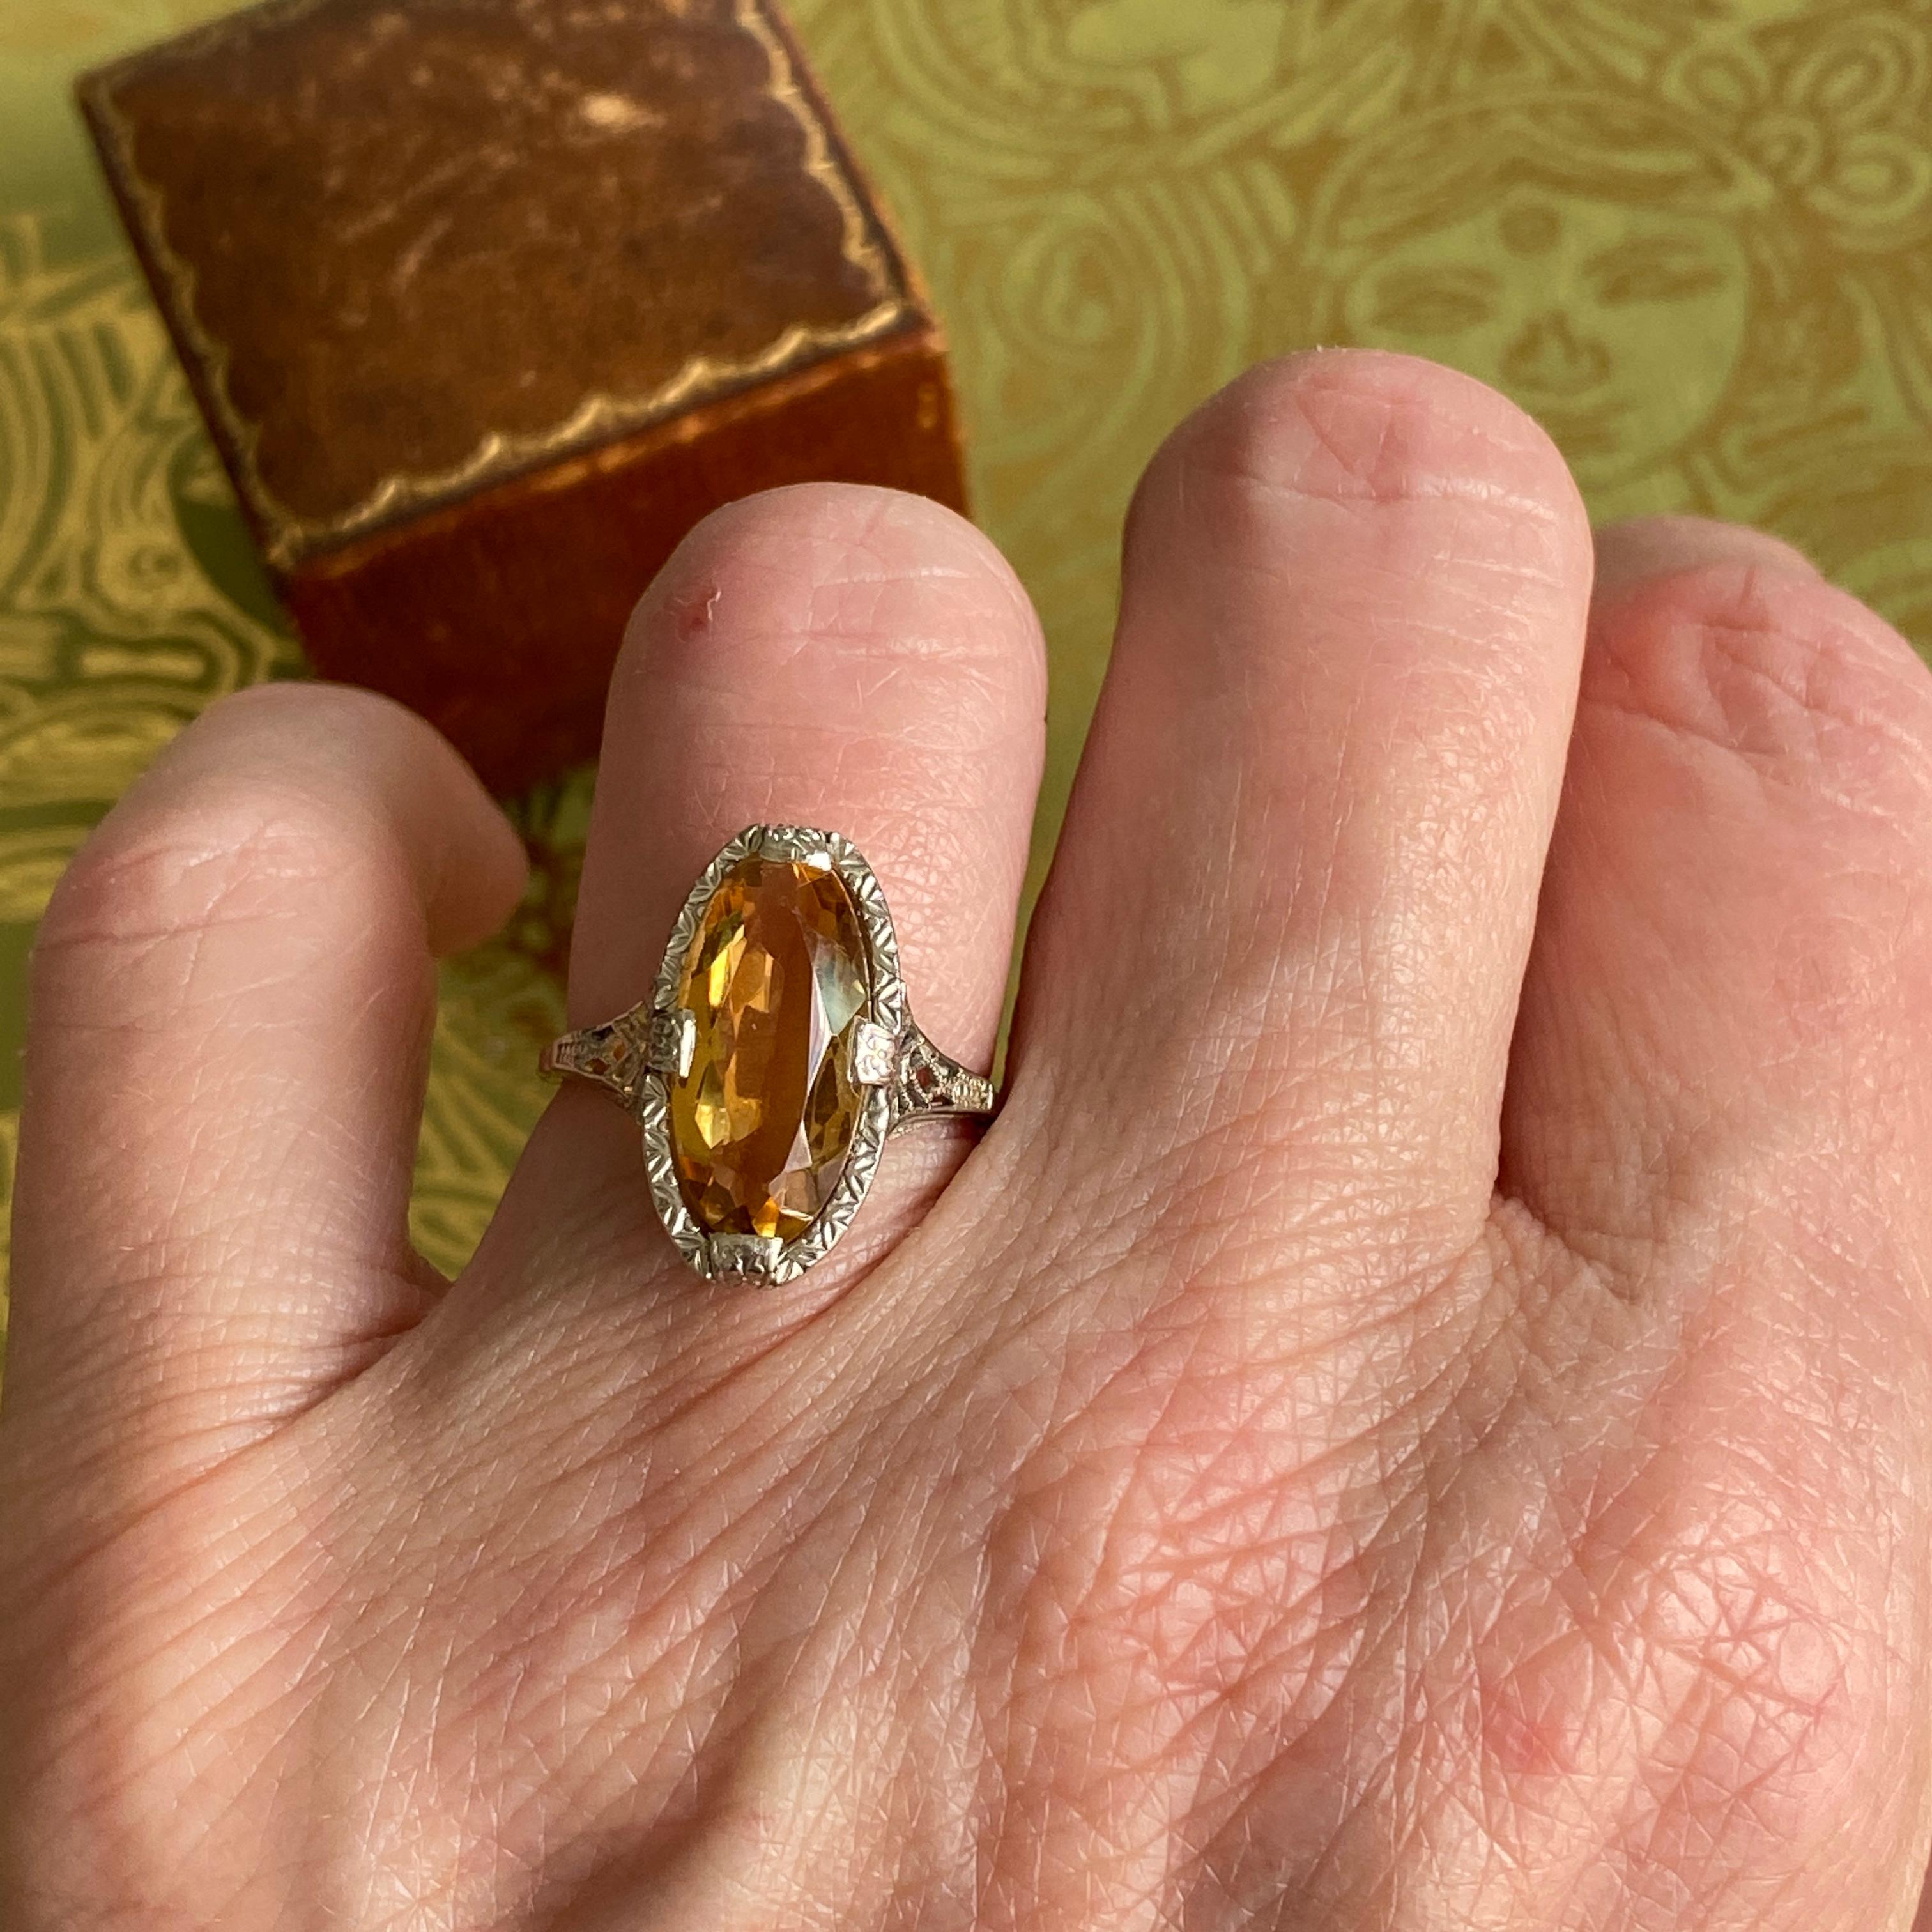 Details:
Beautiful Antique Edwardian era Marquise Citrine set in white 14K gold with filigree and detailed engraving along the setting. A sweet ring, that has a dramatic marquise shape. The citrine has a gorgeous warm golden orange color. The ring